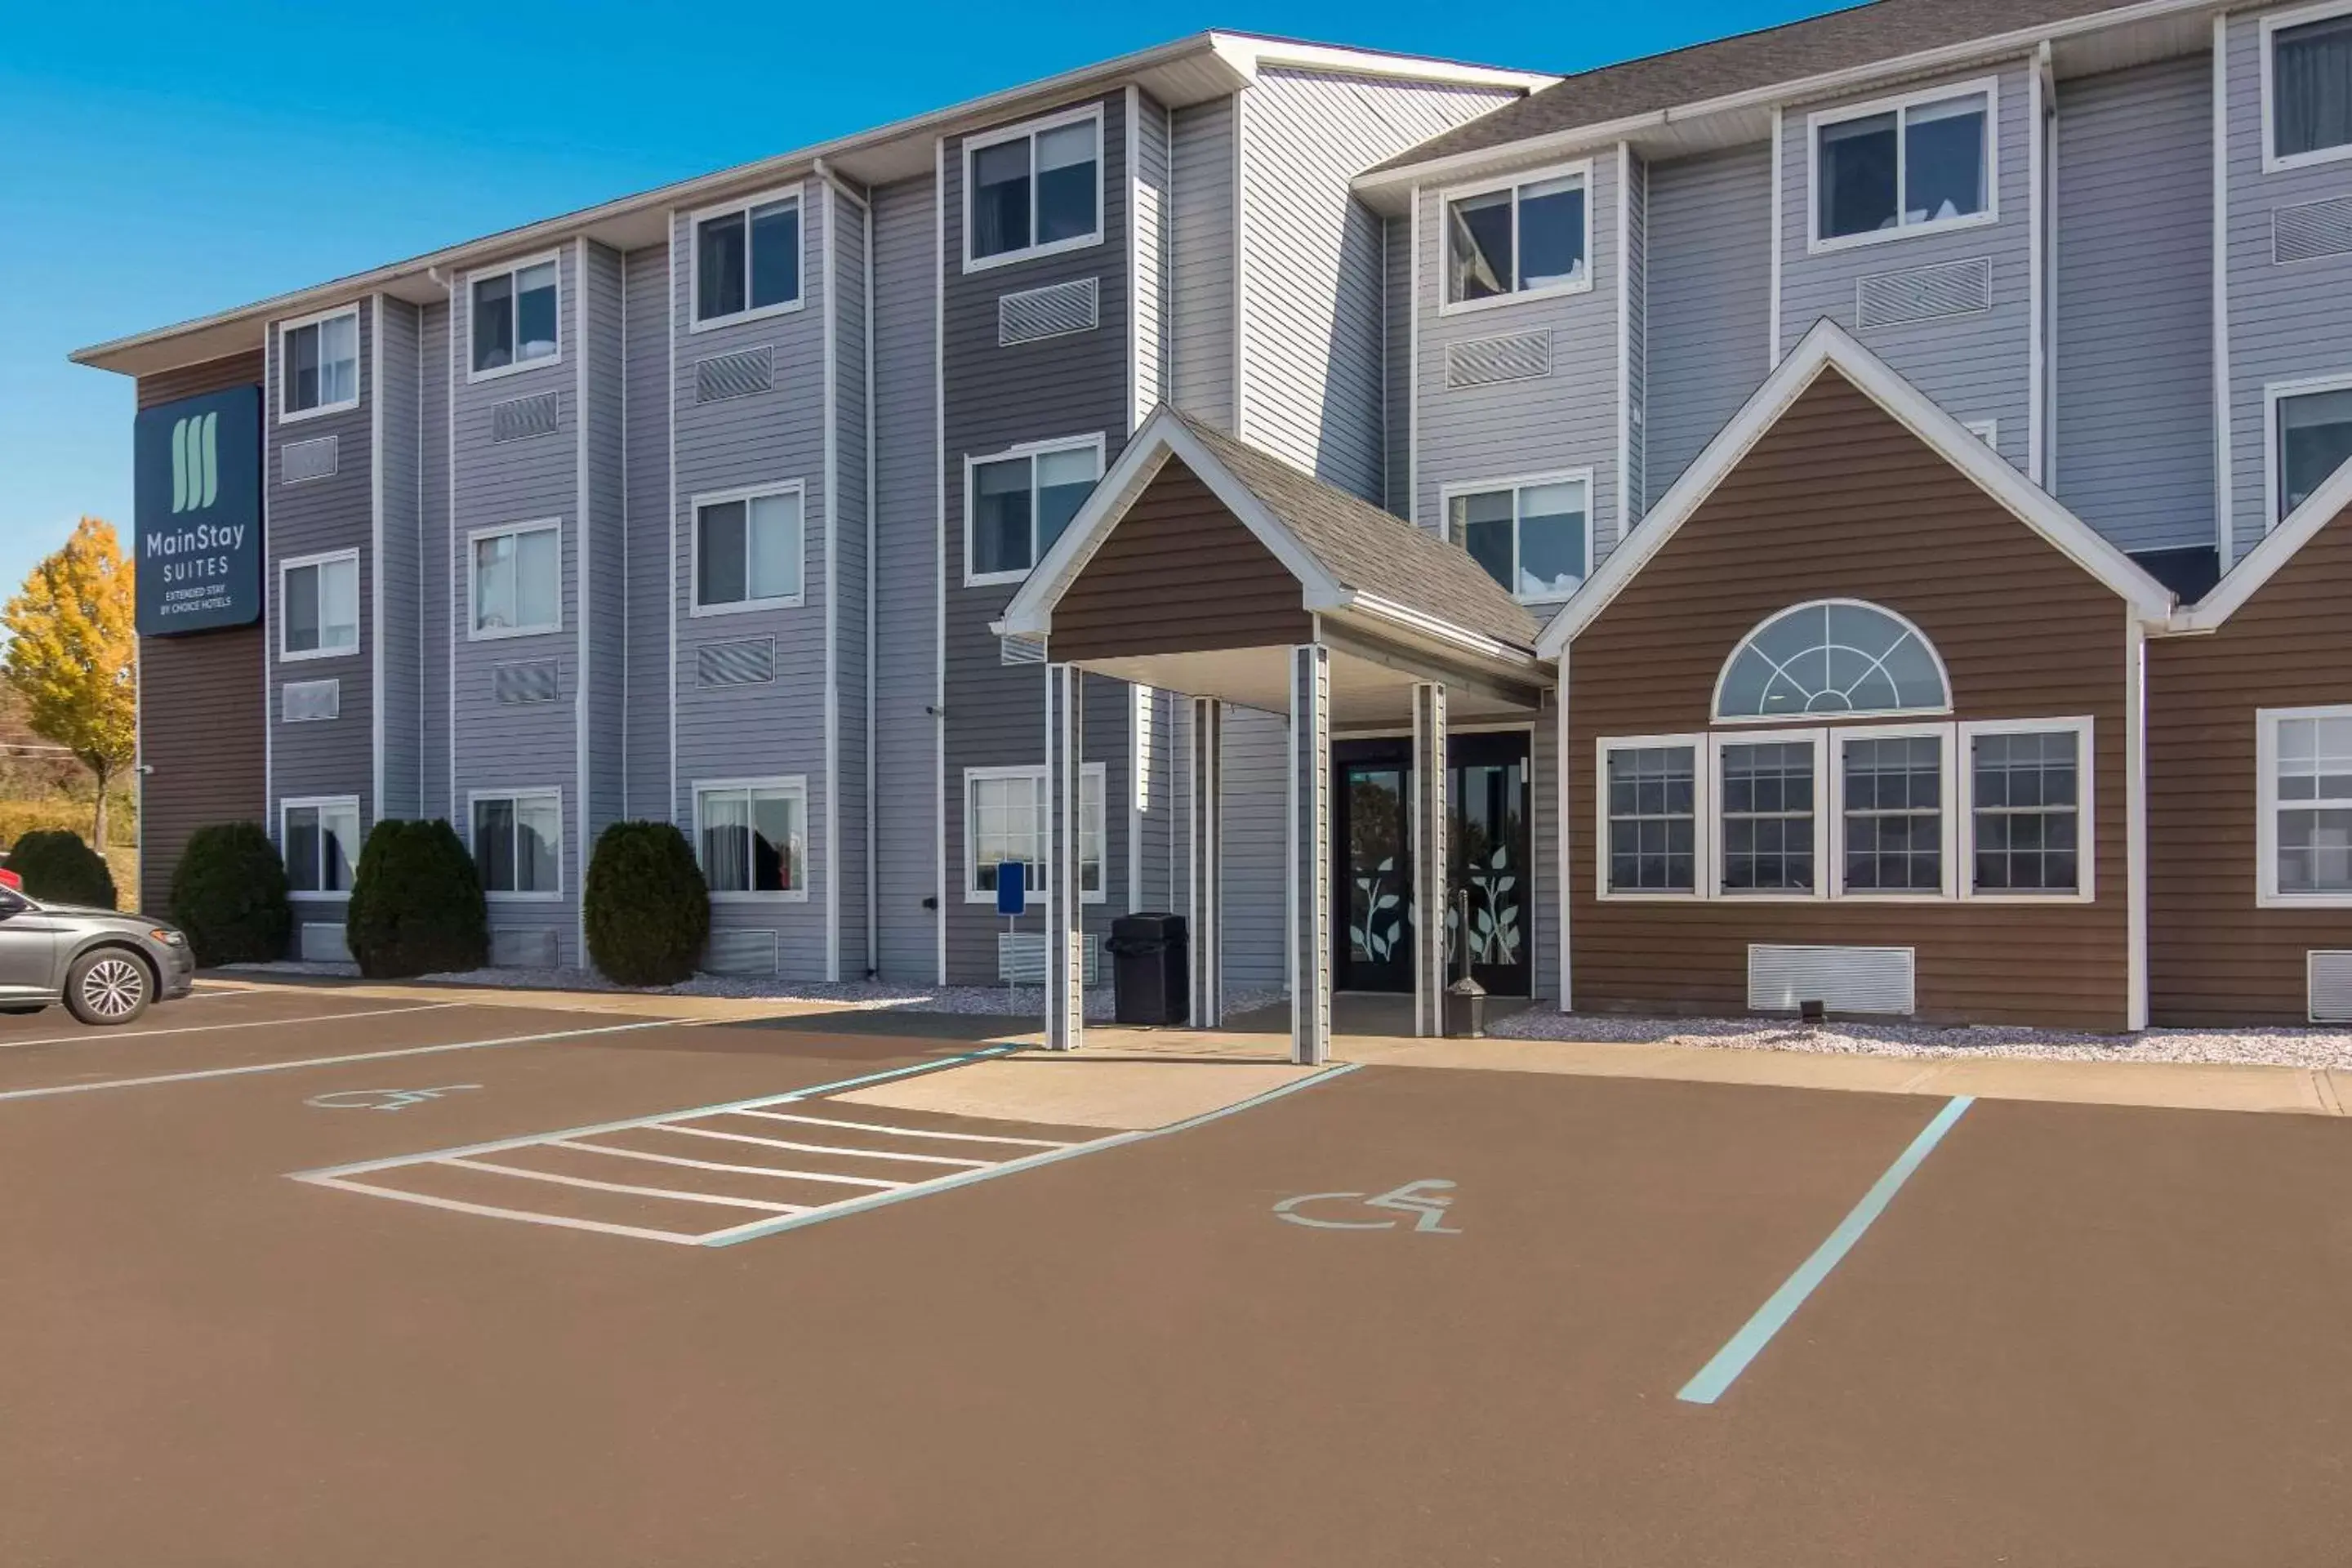 Property Building in MainStay Suites Clarion, PA near I-80